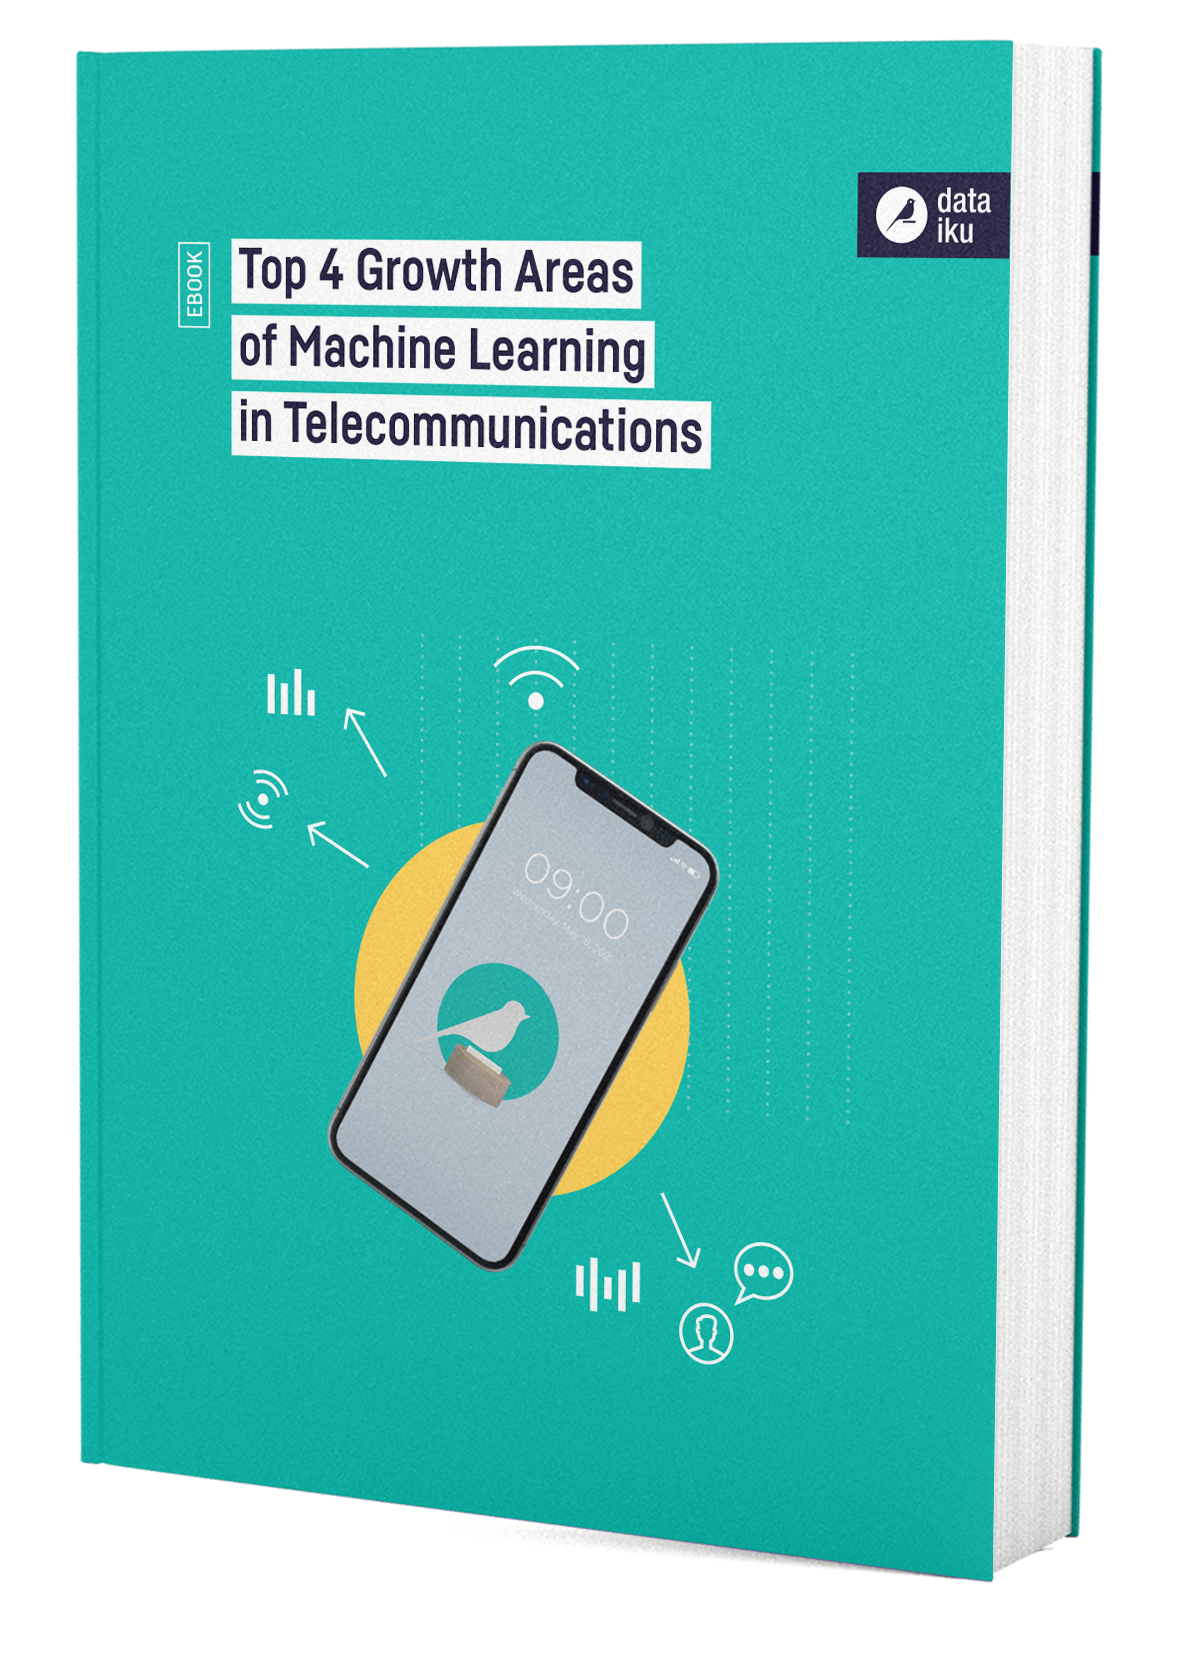 DKU-EBOOK_COVER-WEB-TOP_4_GROWTH_AREAS_OF_MACHINE_LEARNING_IN_TELECOMMUNICATIONS-BAT_210520.indd